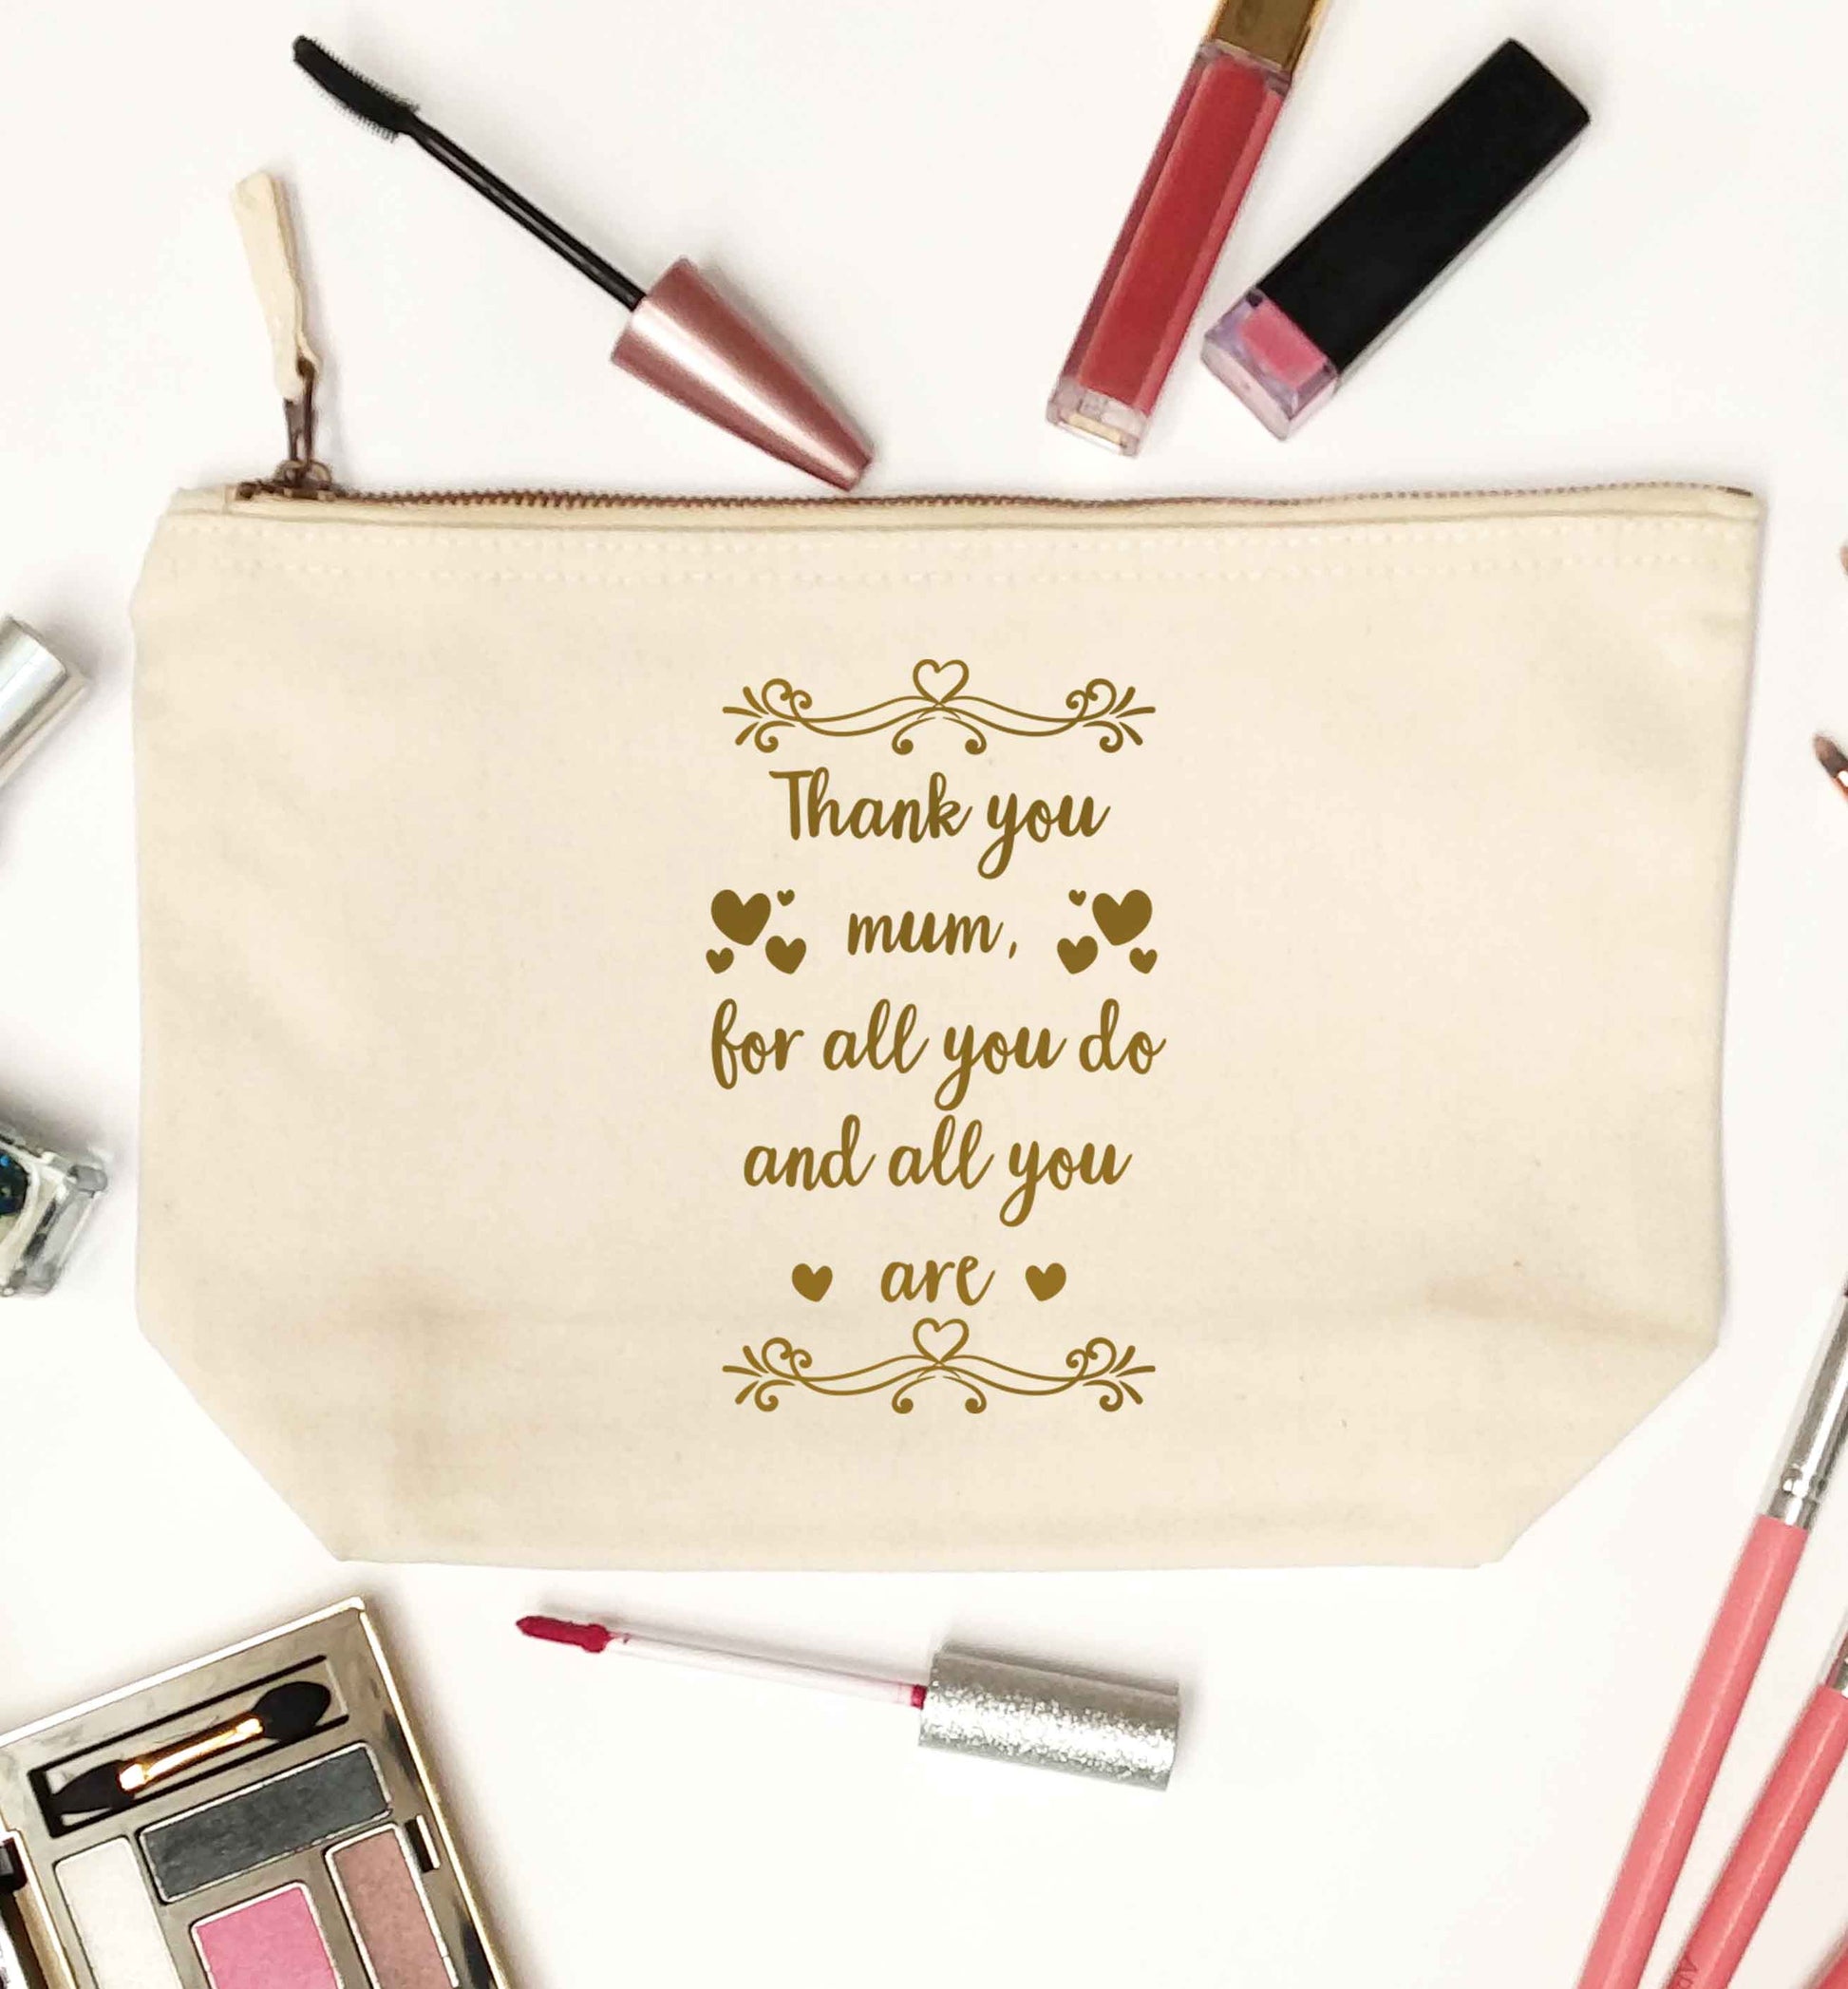 Gorgeous gifts for mums on mother's day! Thank you mum for all you do and all you are natural makeup bag